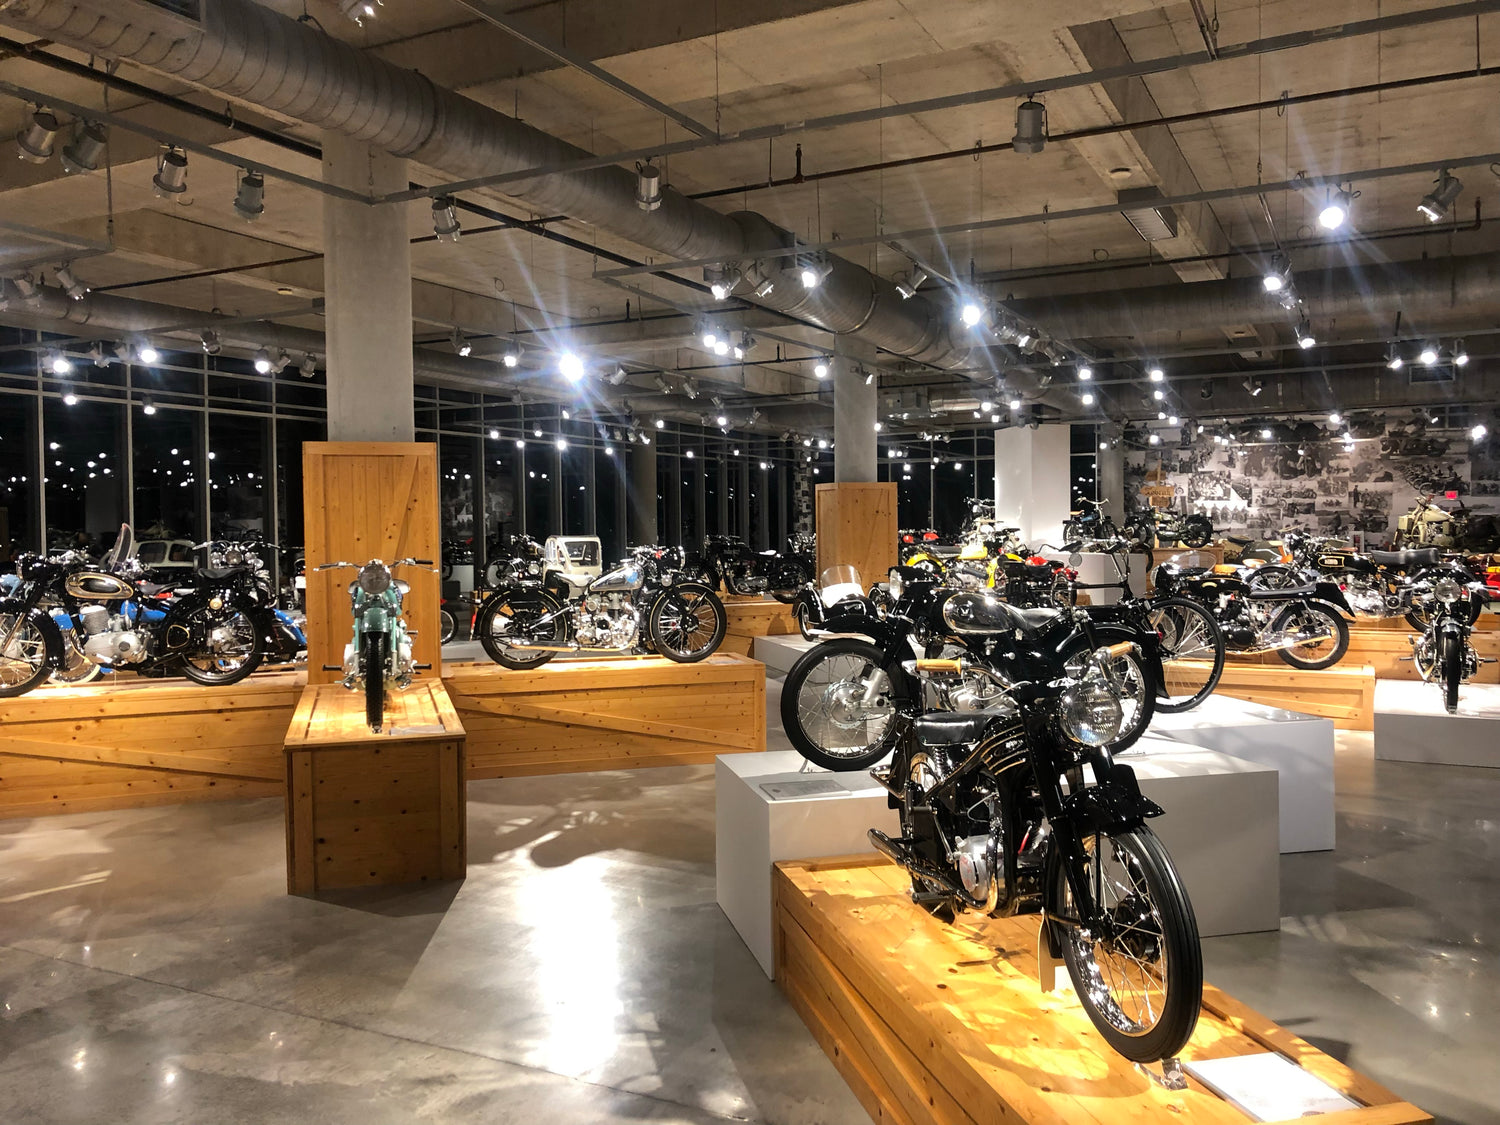 Blog Post No. 22 - BMW Motorrad - A Bavarian Soulstory - Episode 3: Kids in a Candy Store